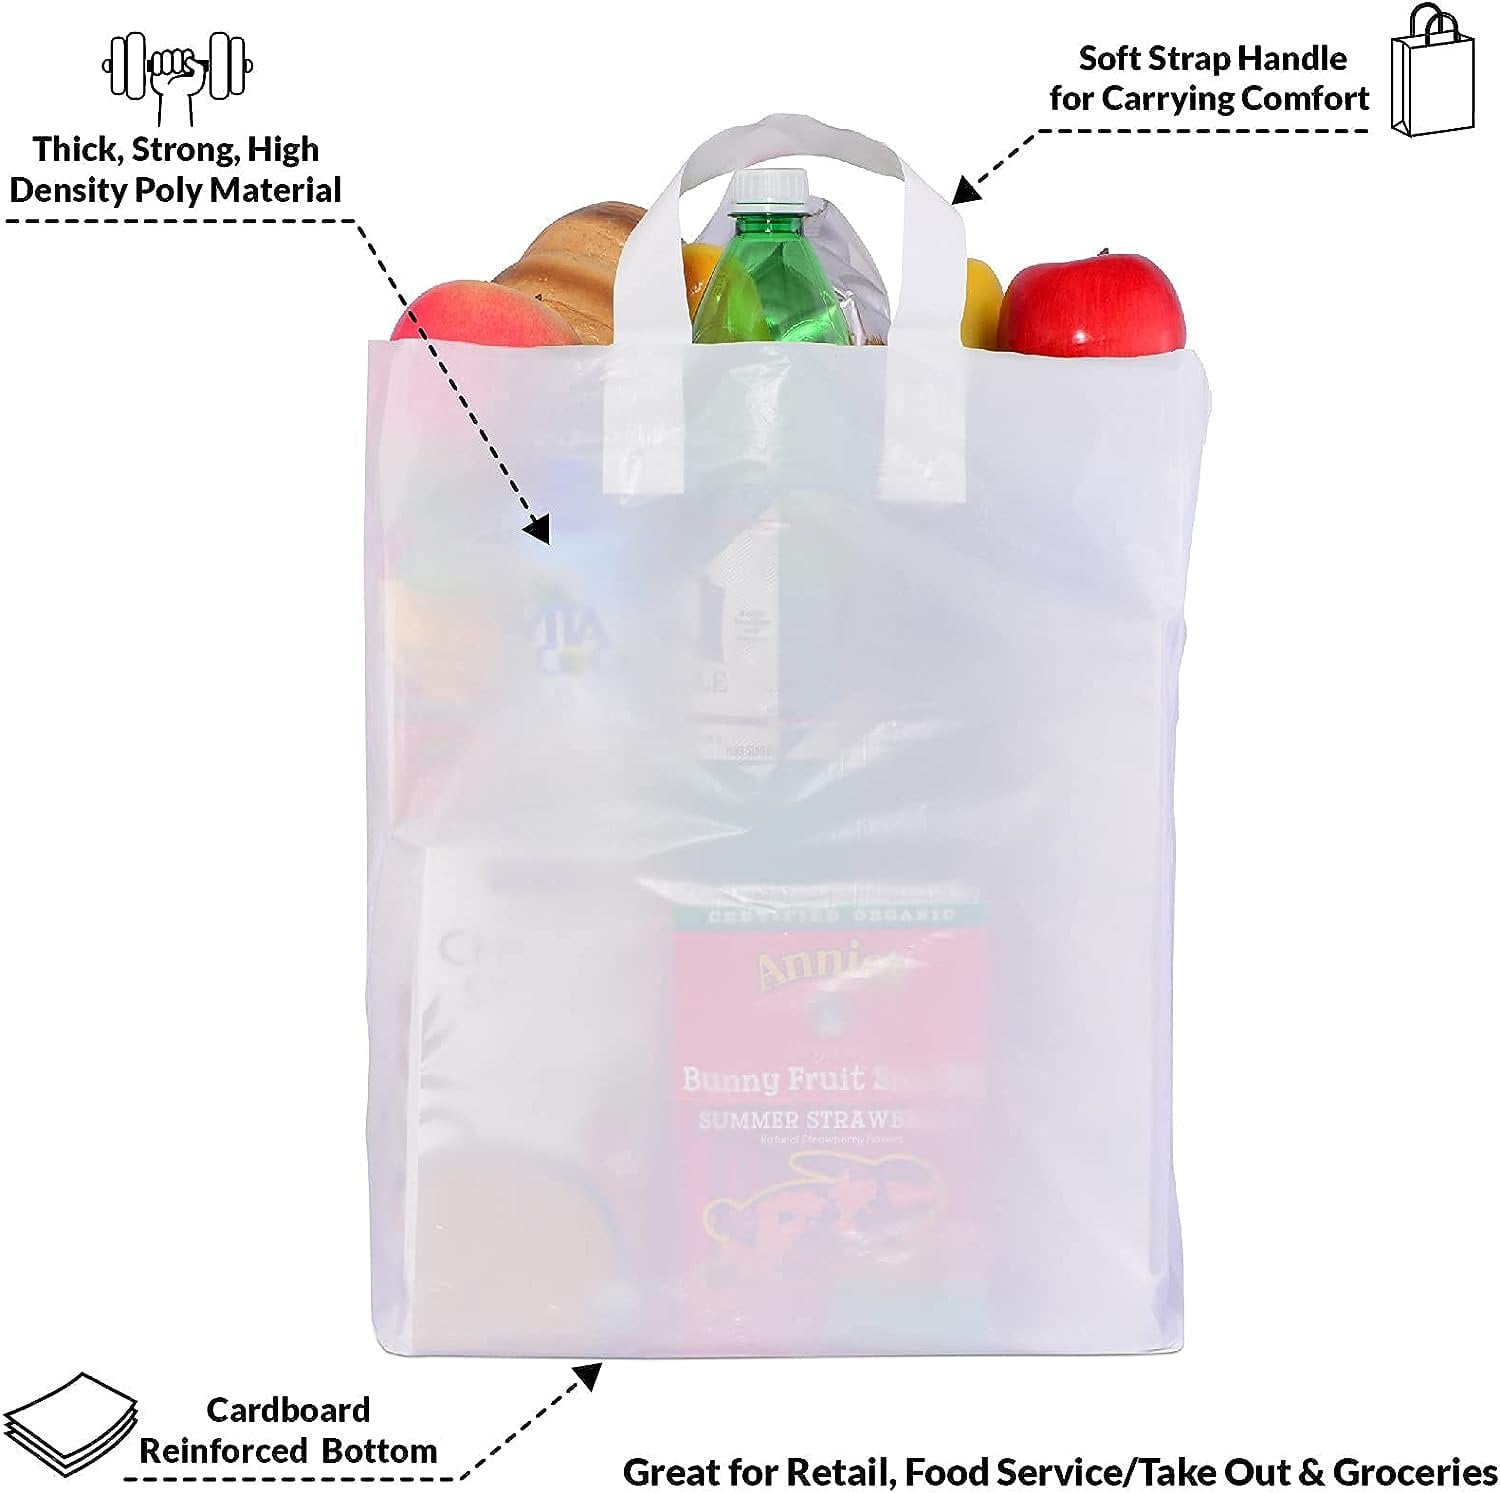 Prime Line Packaging Clear Plastic Bags with Handles Retail Bags for Gifts  Bulk 100 Pk 8x4x10, 100 Pcs - Kroger